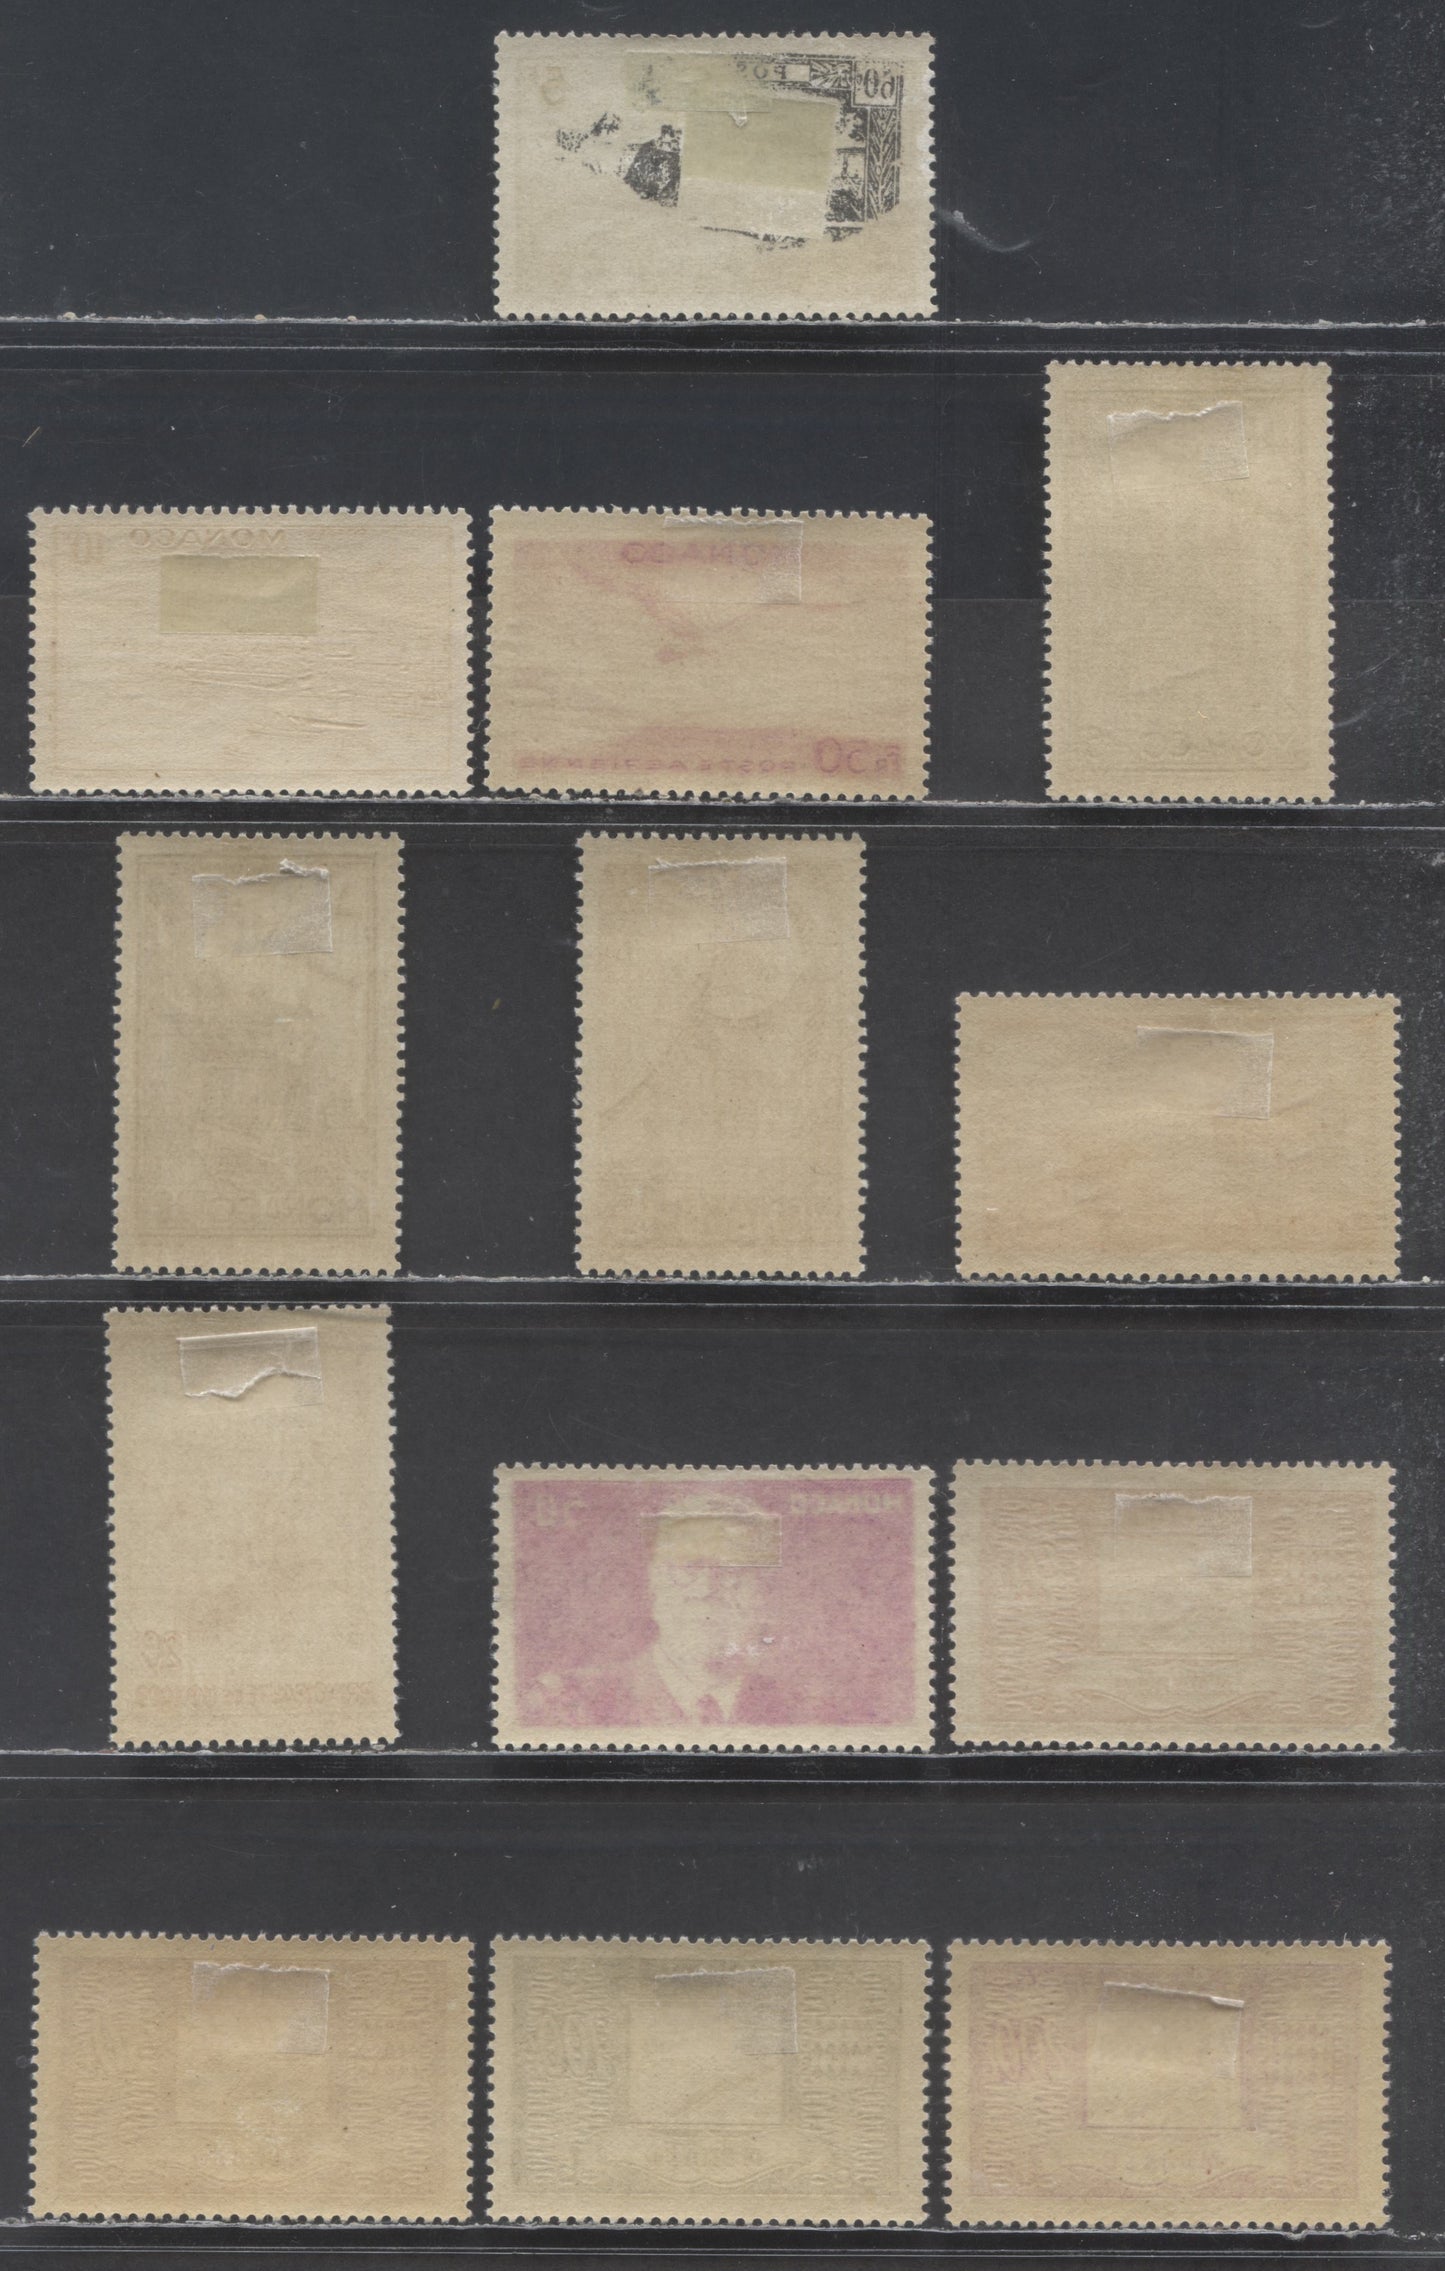 Lot 68 Monaco SC#228/C13 1943-1946 Prince Louis II - Airmail Issues, 13 VFOG Singles, Click on Listing to See ALL Pictures, Estimated Value $15